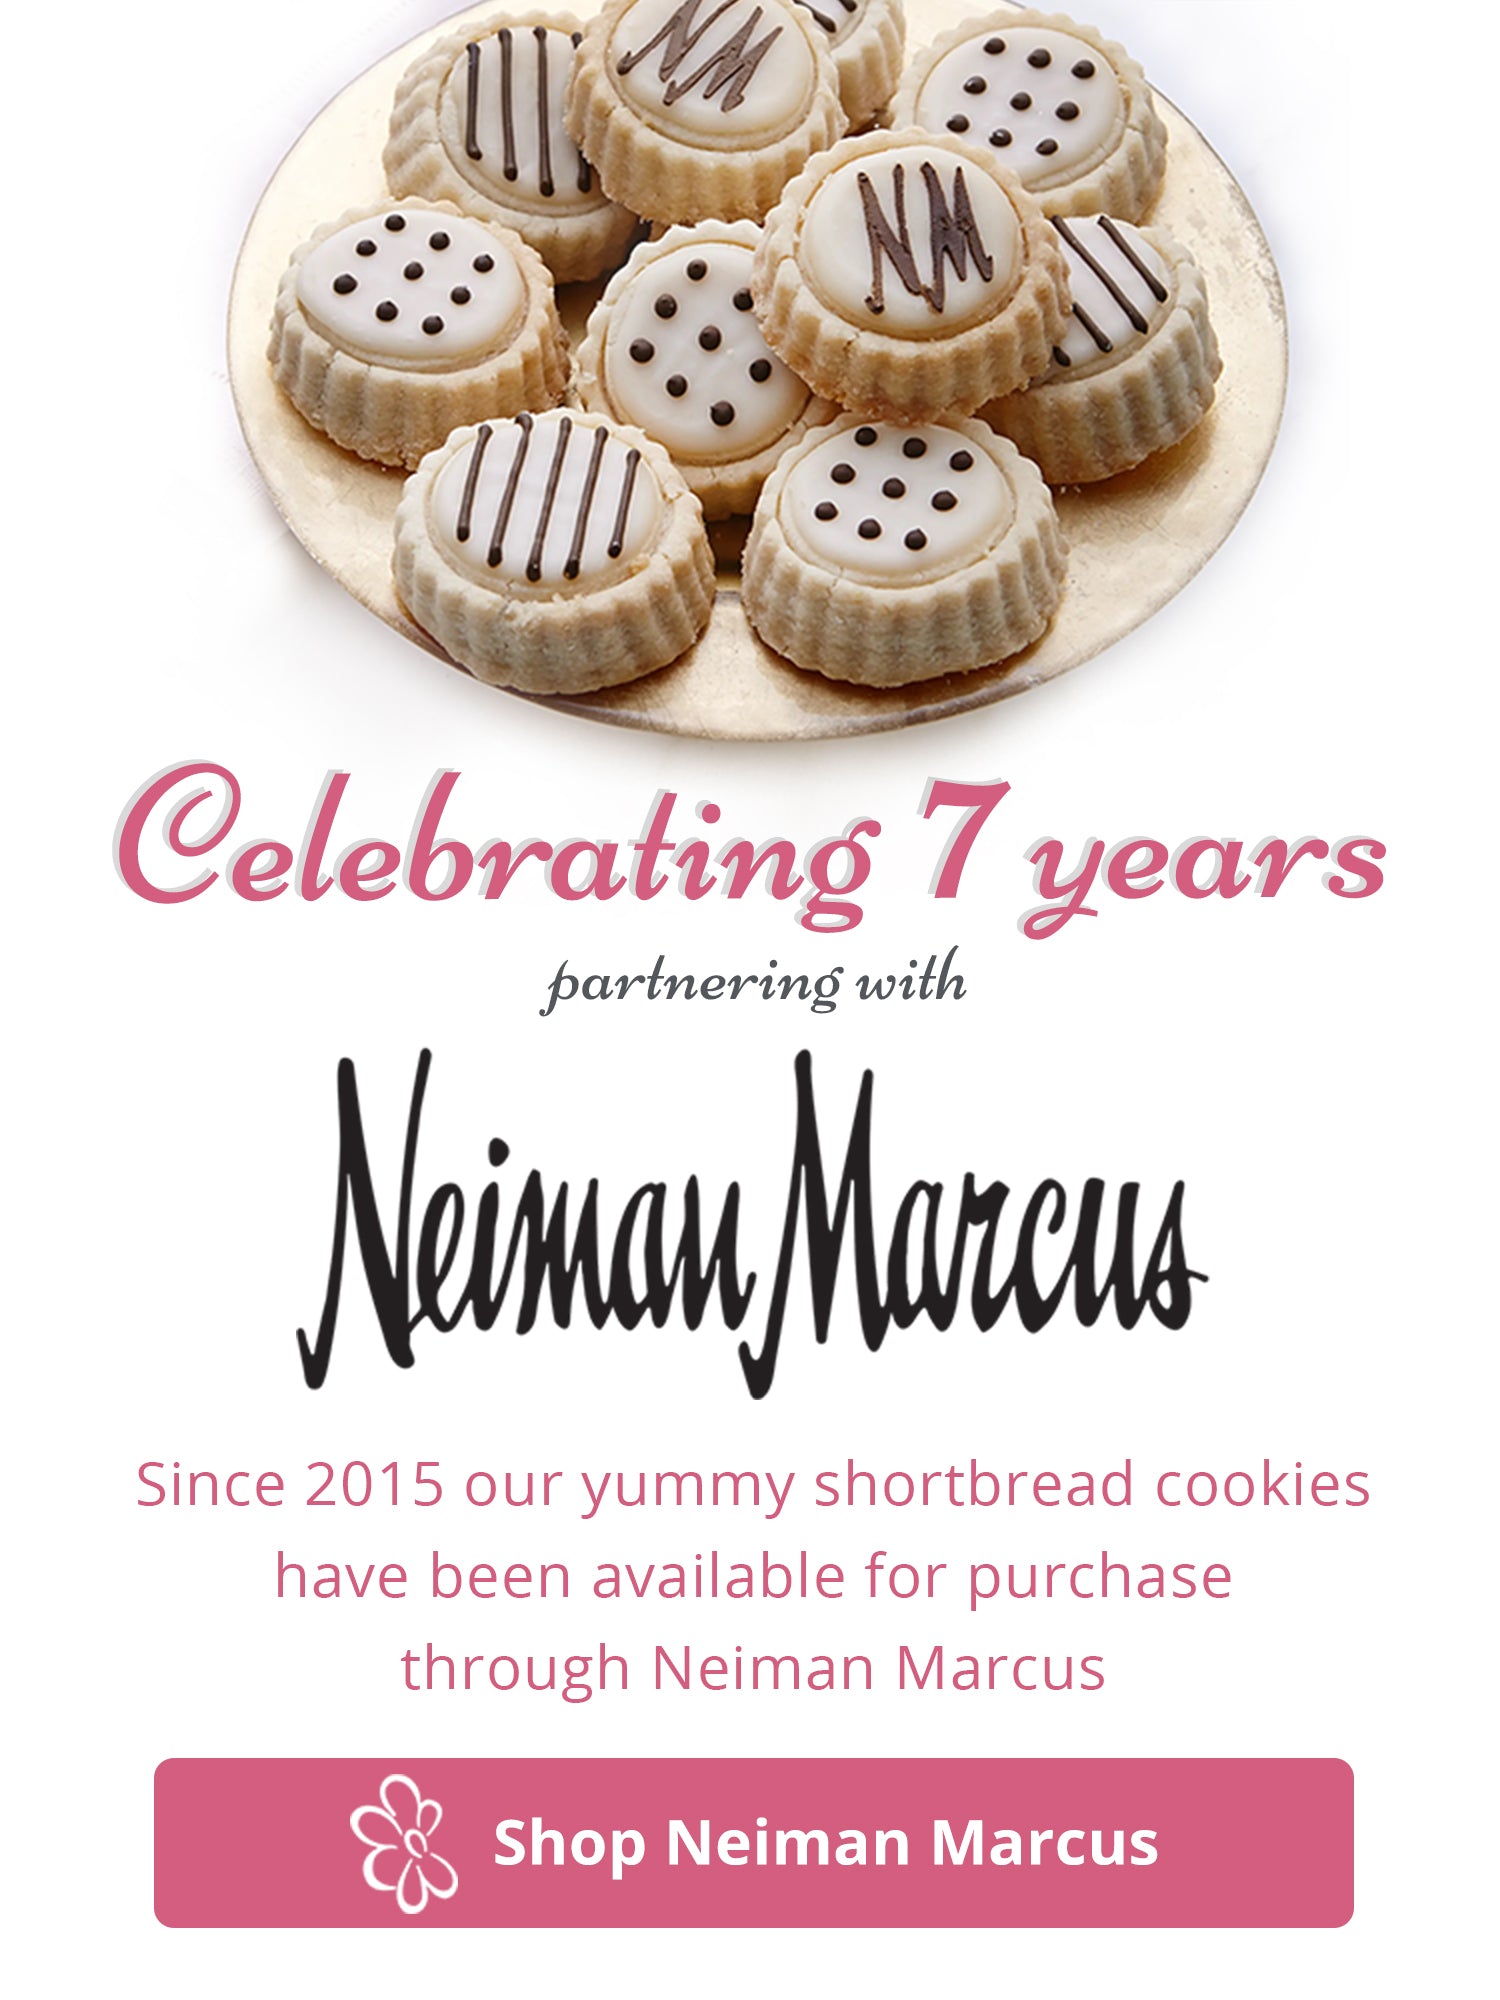 Celebrating 7 years partnering with Neiman Marcus